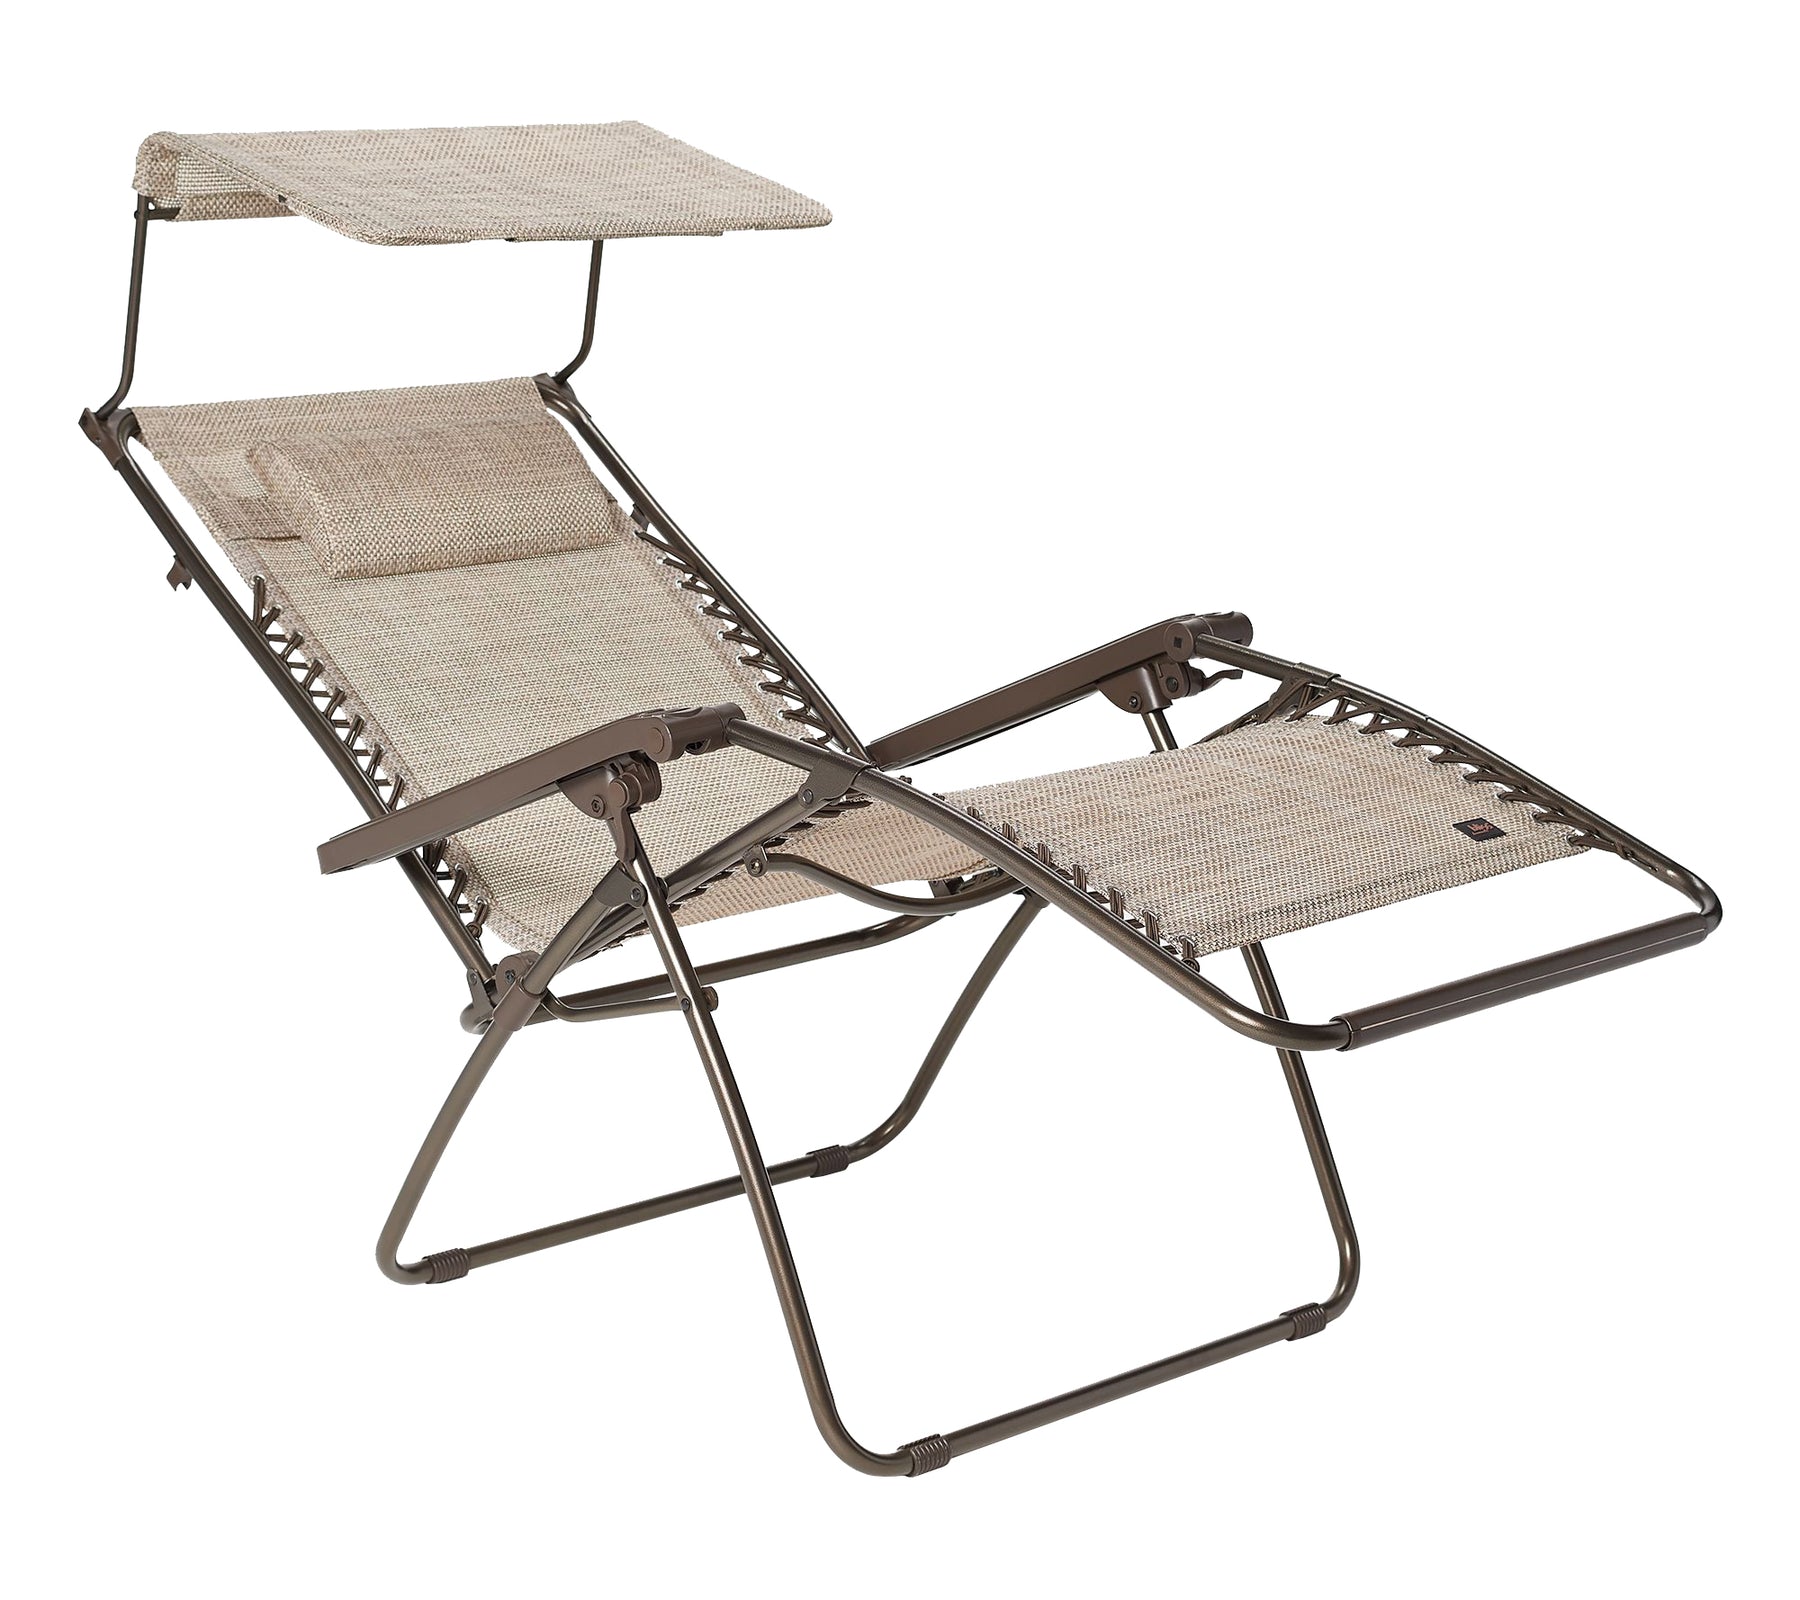 Angled view of a reclined Bliss Hammocks 30-inch Wide XL Zero Gravity Chair with Canopy in the sand variation.